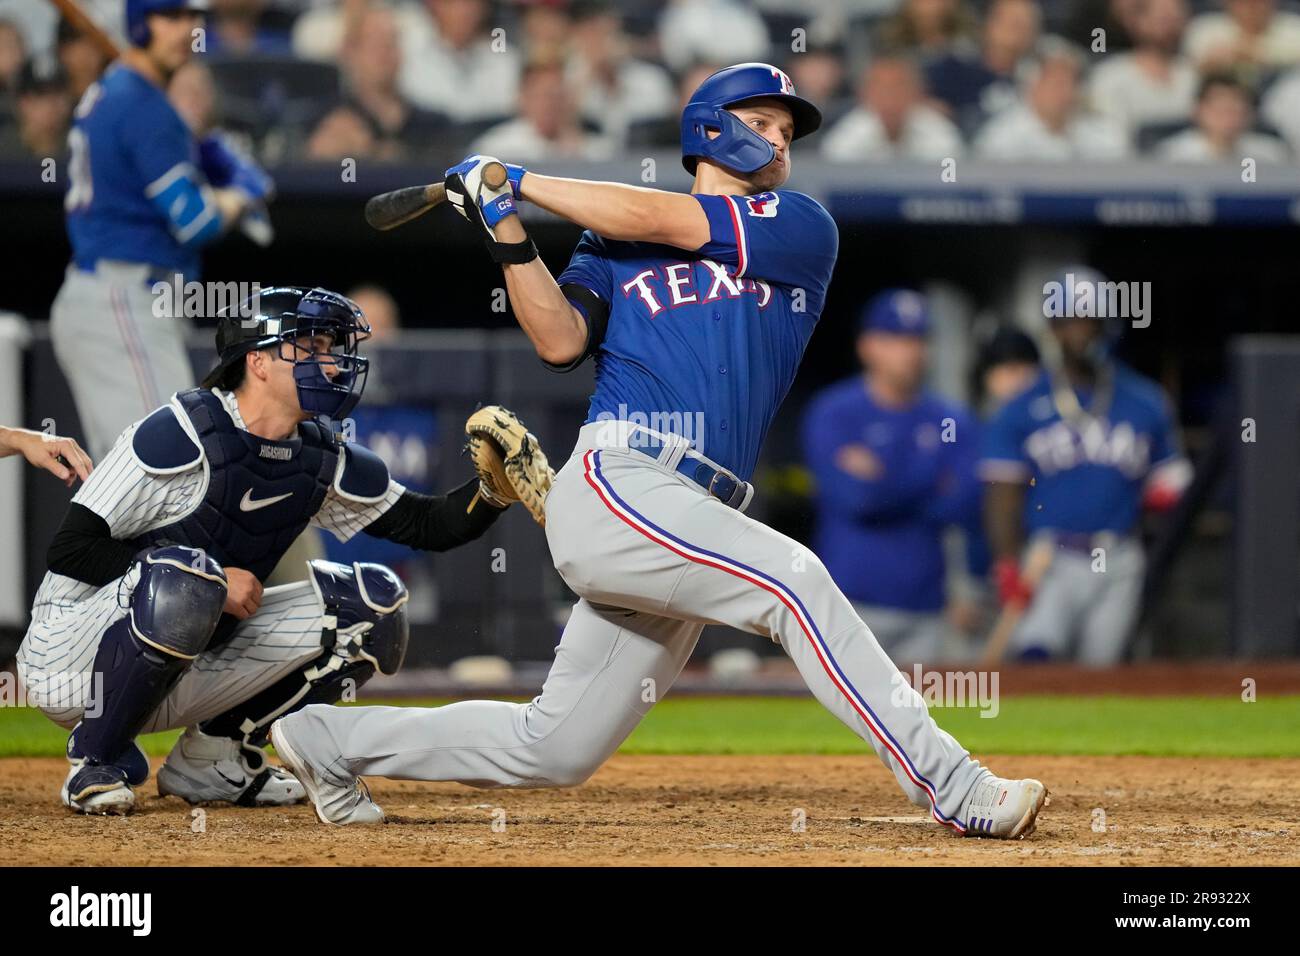 Texas Rangers' Corey Seager hits a double in the ninth inning of a